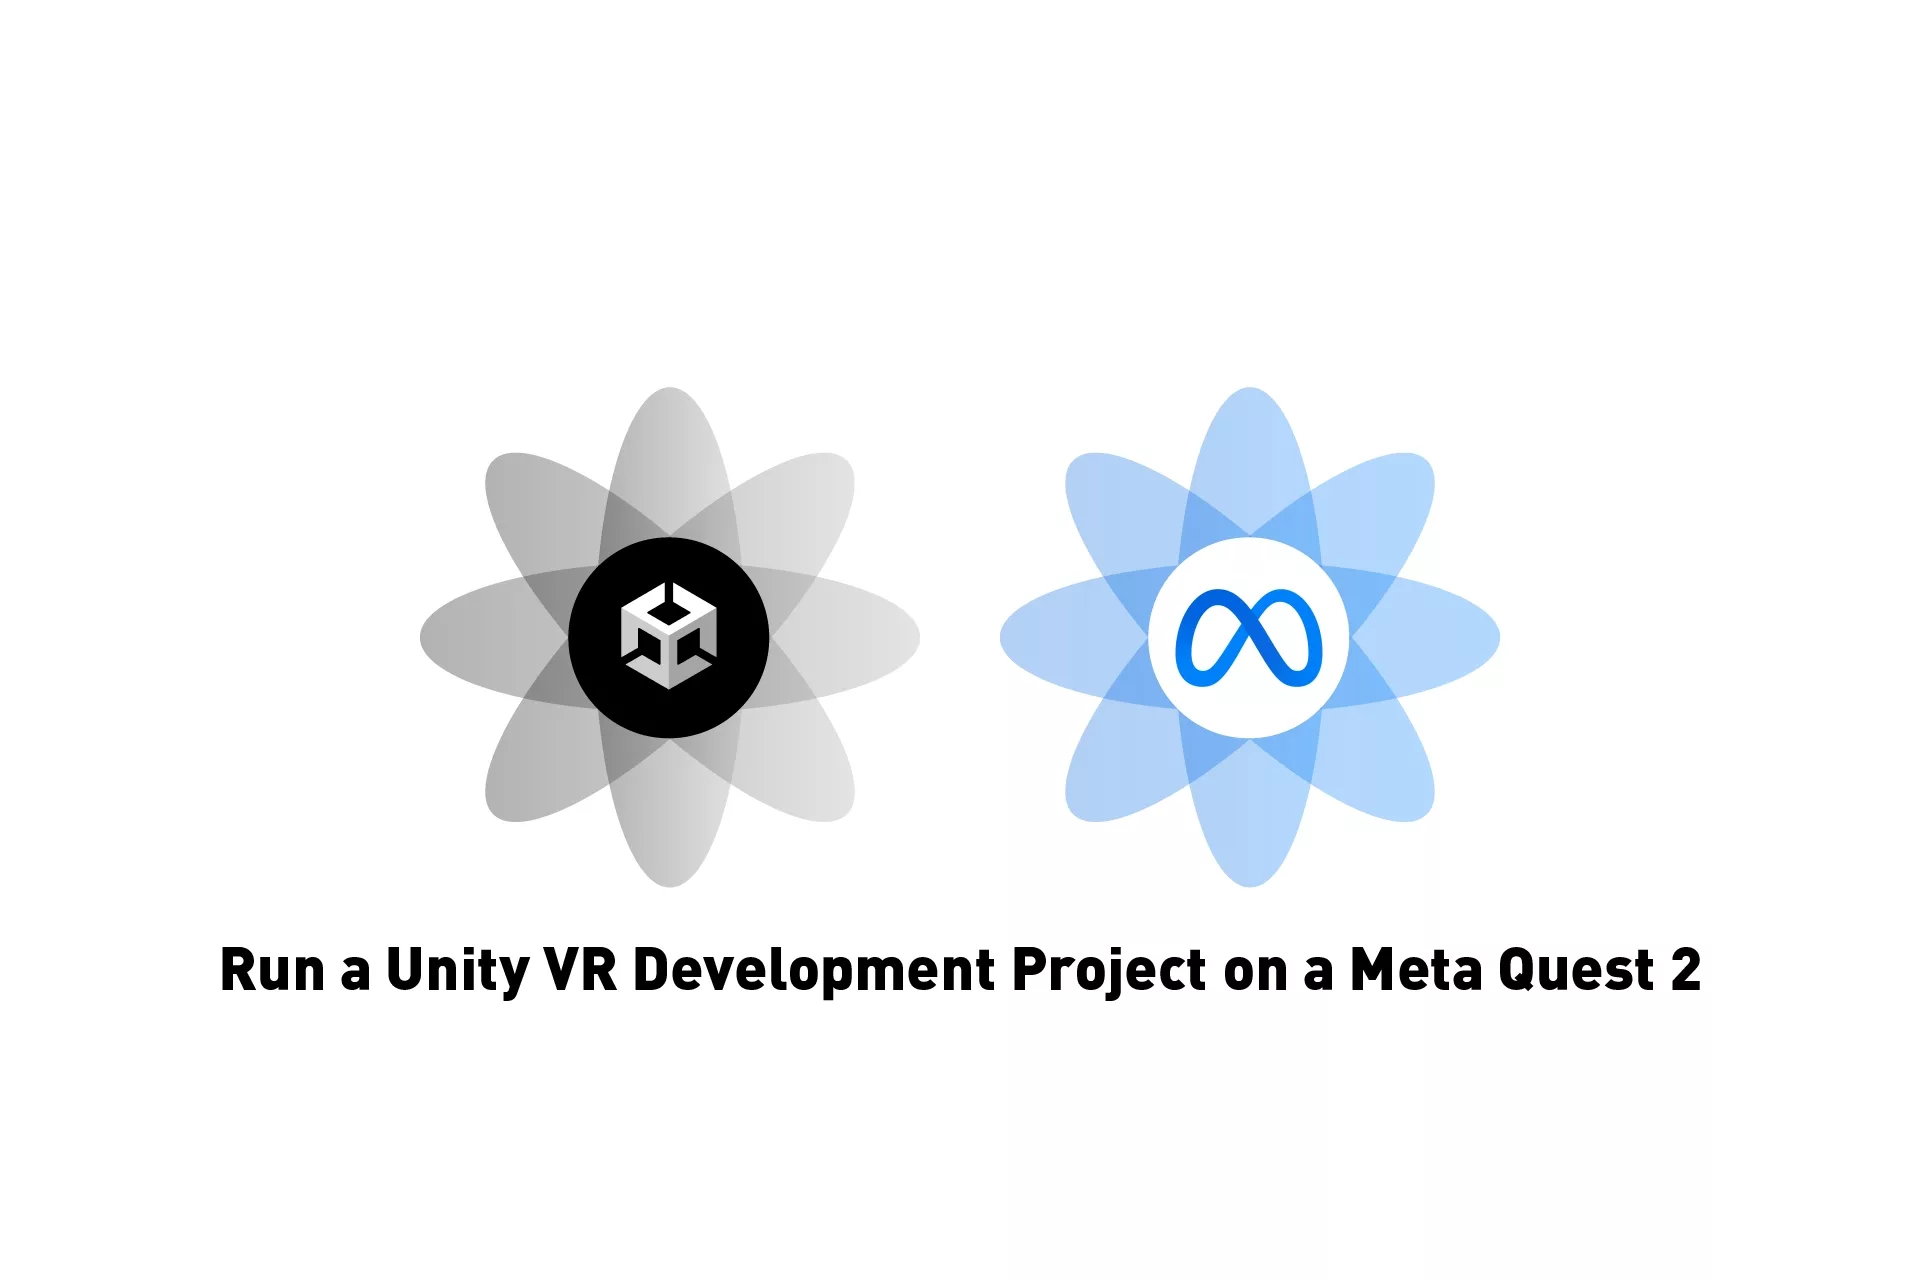 Two flowers that represent Unity and Meta side by side with the text "Run a Unity VR Development Project on a Meta Quest 2" beneath it.